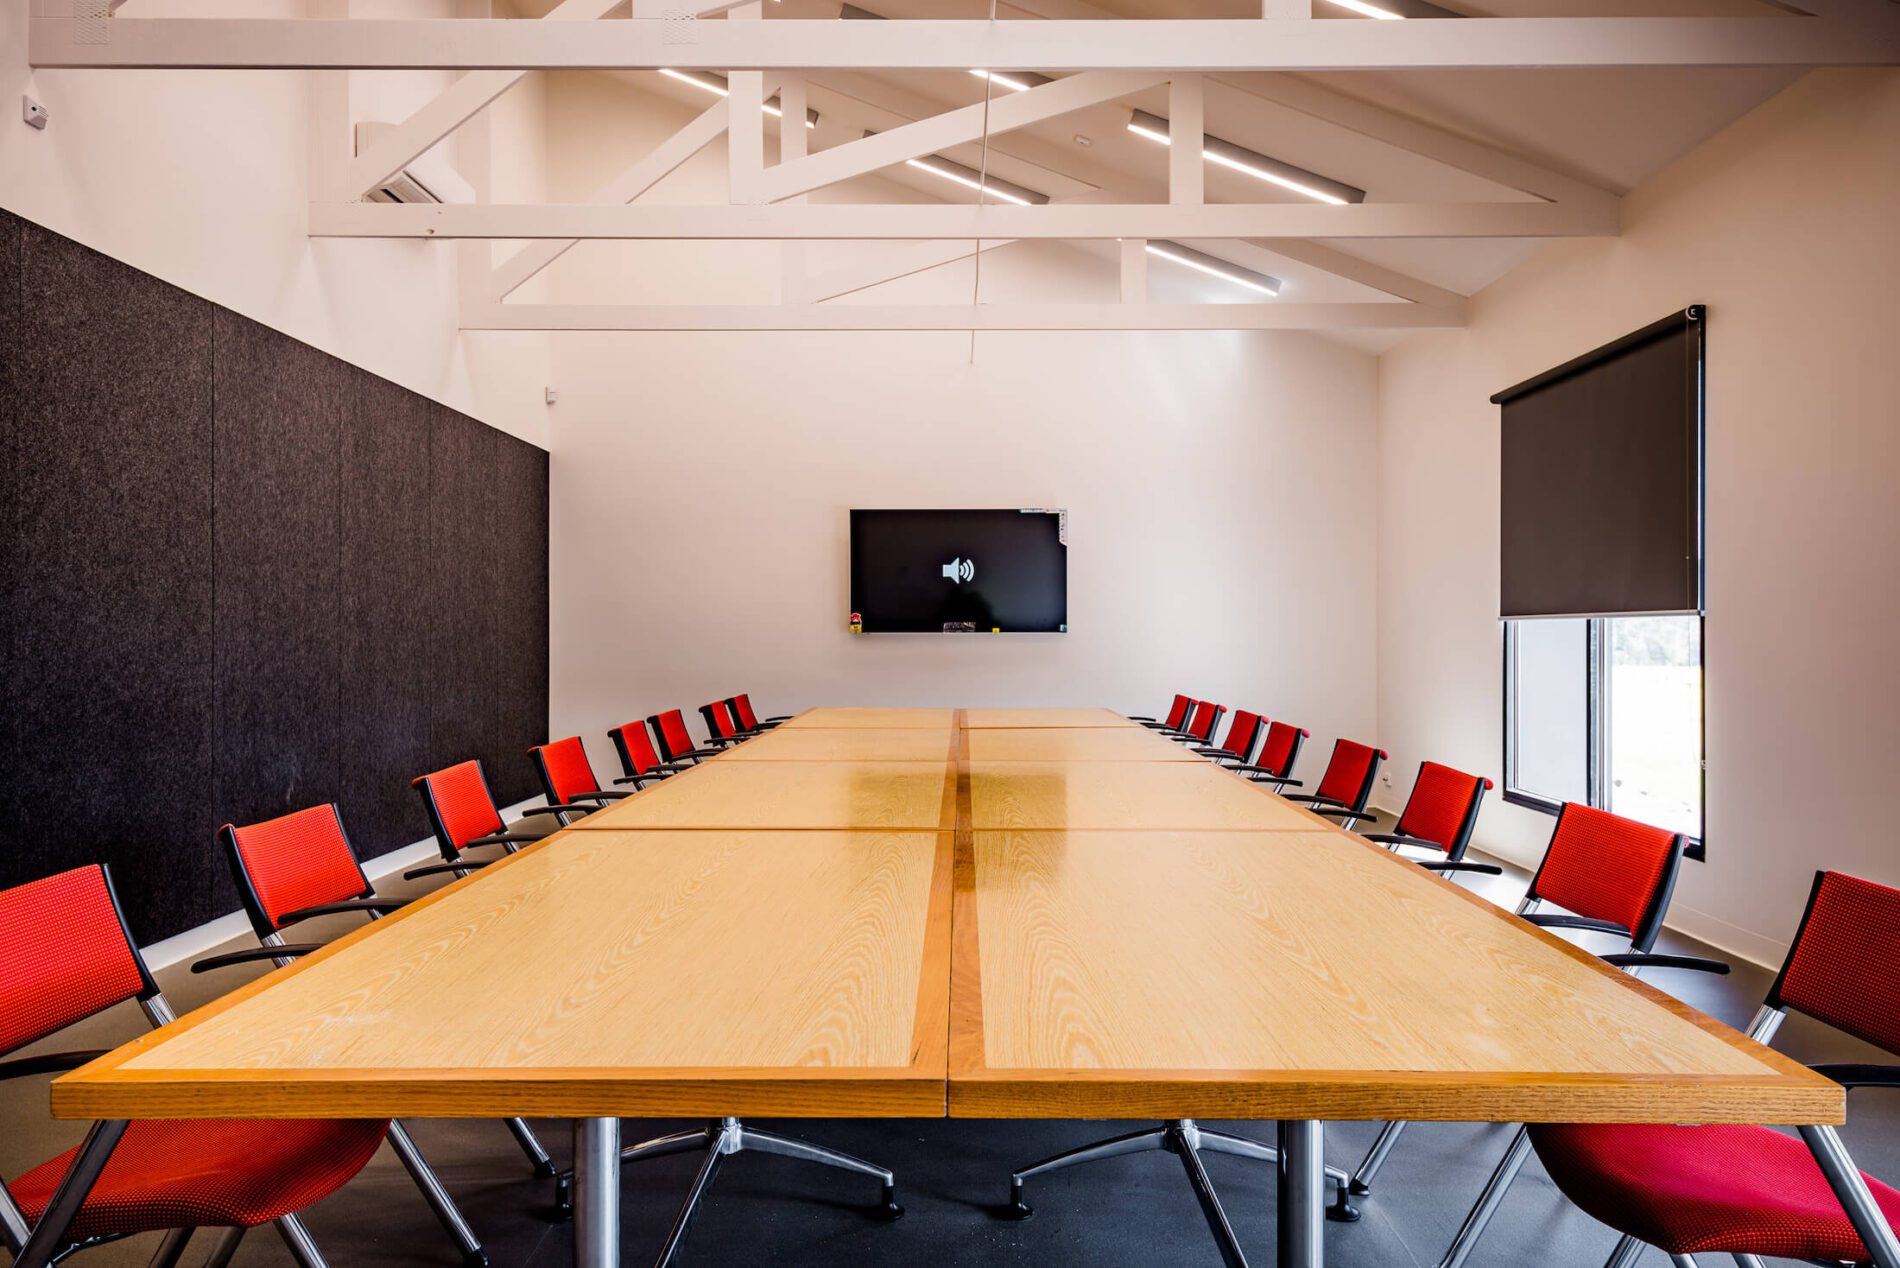 Boardroom with dark pinboard wall, 16 red chairs around 8 joined timber tables